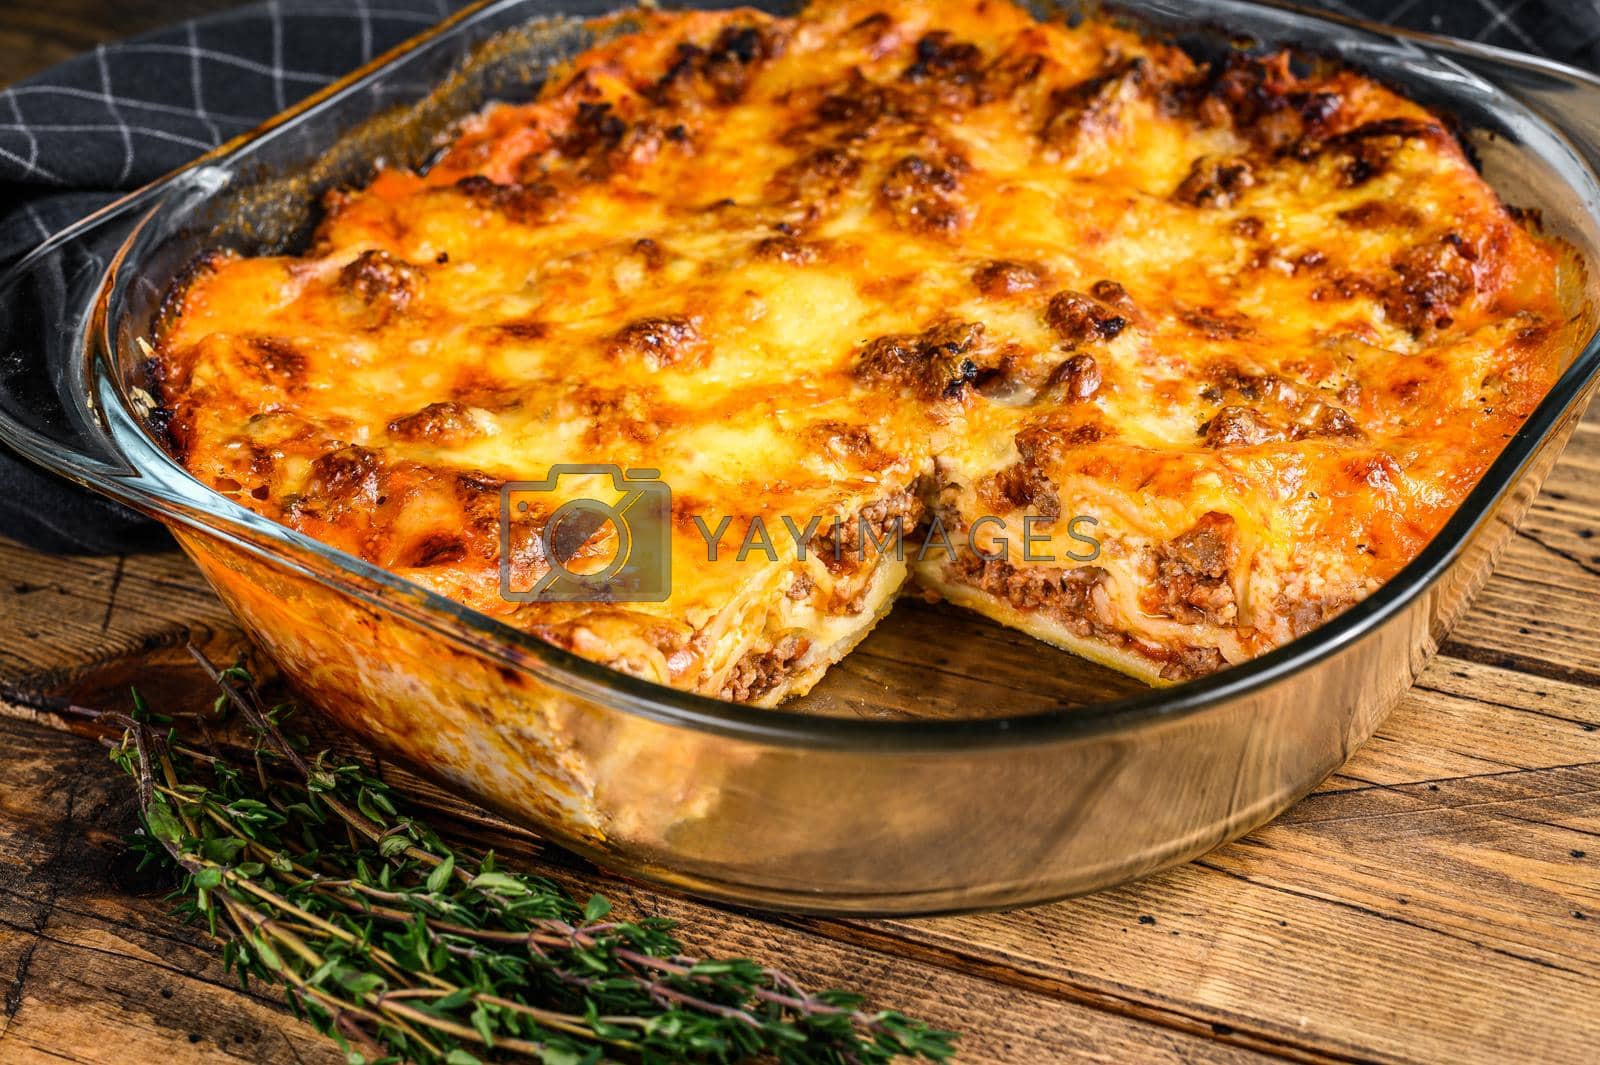 Royalty free image of Lasagna with bolognese sauce and mince beef in a baking dish. Wooden background. Top view by Composter